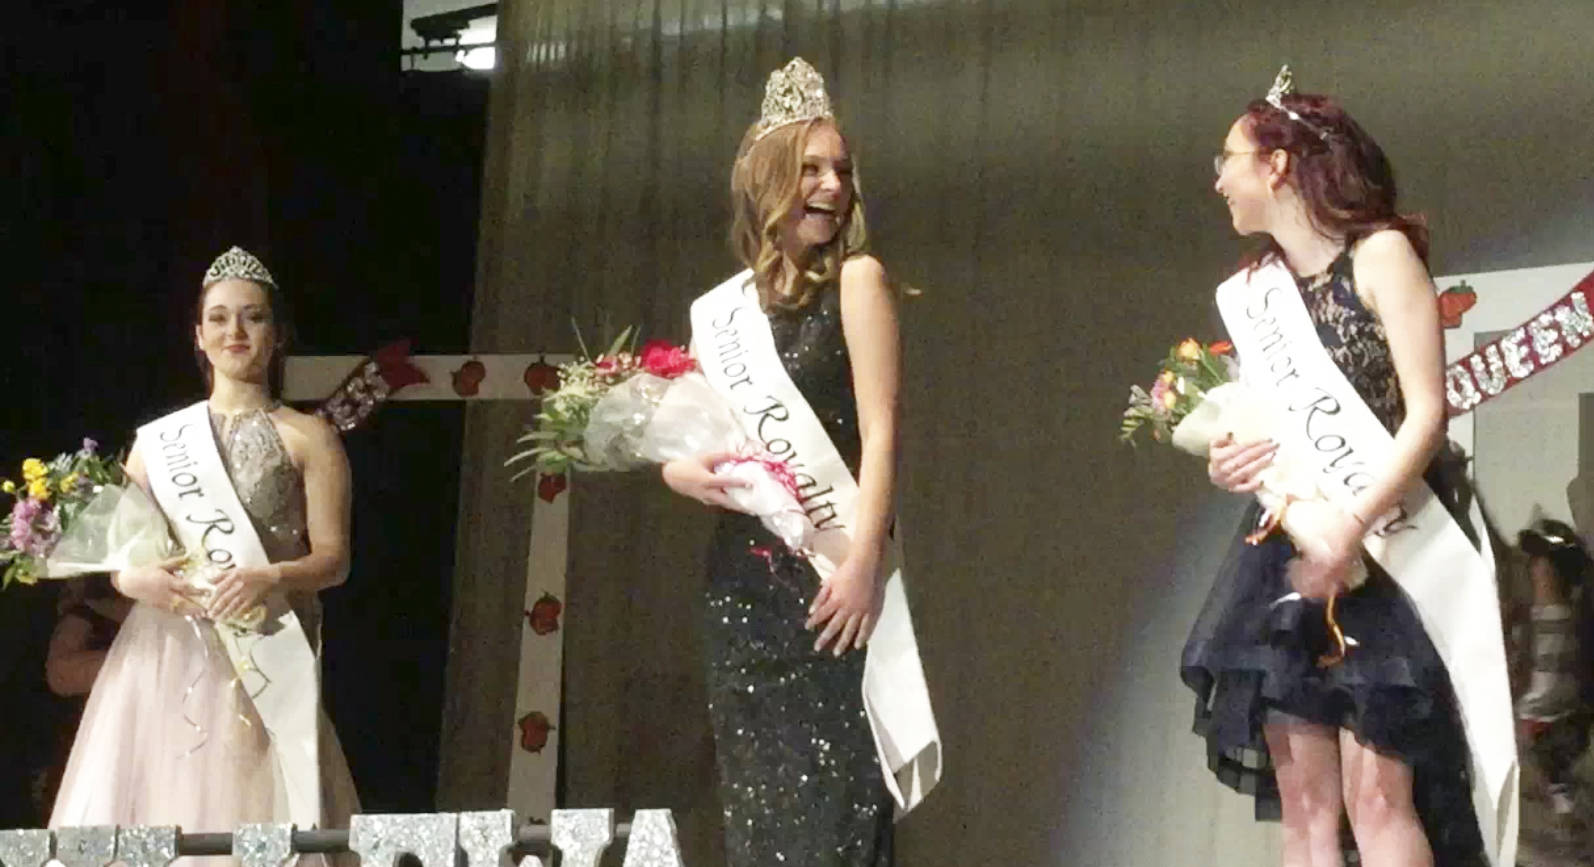 Natalia Zieroth shares a laugh of incredulity with fellow Marysville-Pilchuck High School senior Brionna Olson and Marysville Getchell senior Jael Hudson after Zieroth was named 2019 Marysville Strawberry Festival queen Saturday during the April Friesner Memorial Royalty Scholarship Pageant in the M-P auditorium. Candidates Olson and Hudson were selected as princesses.